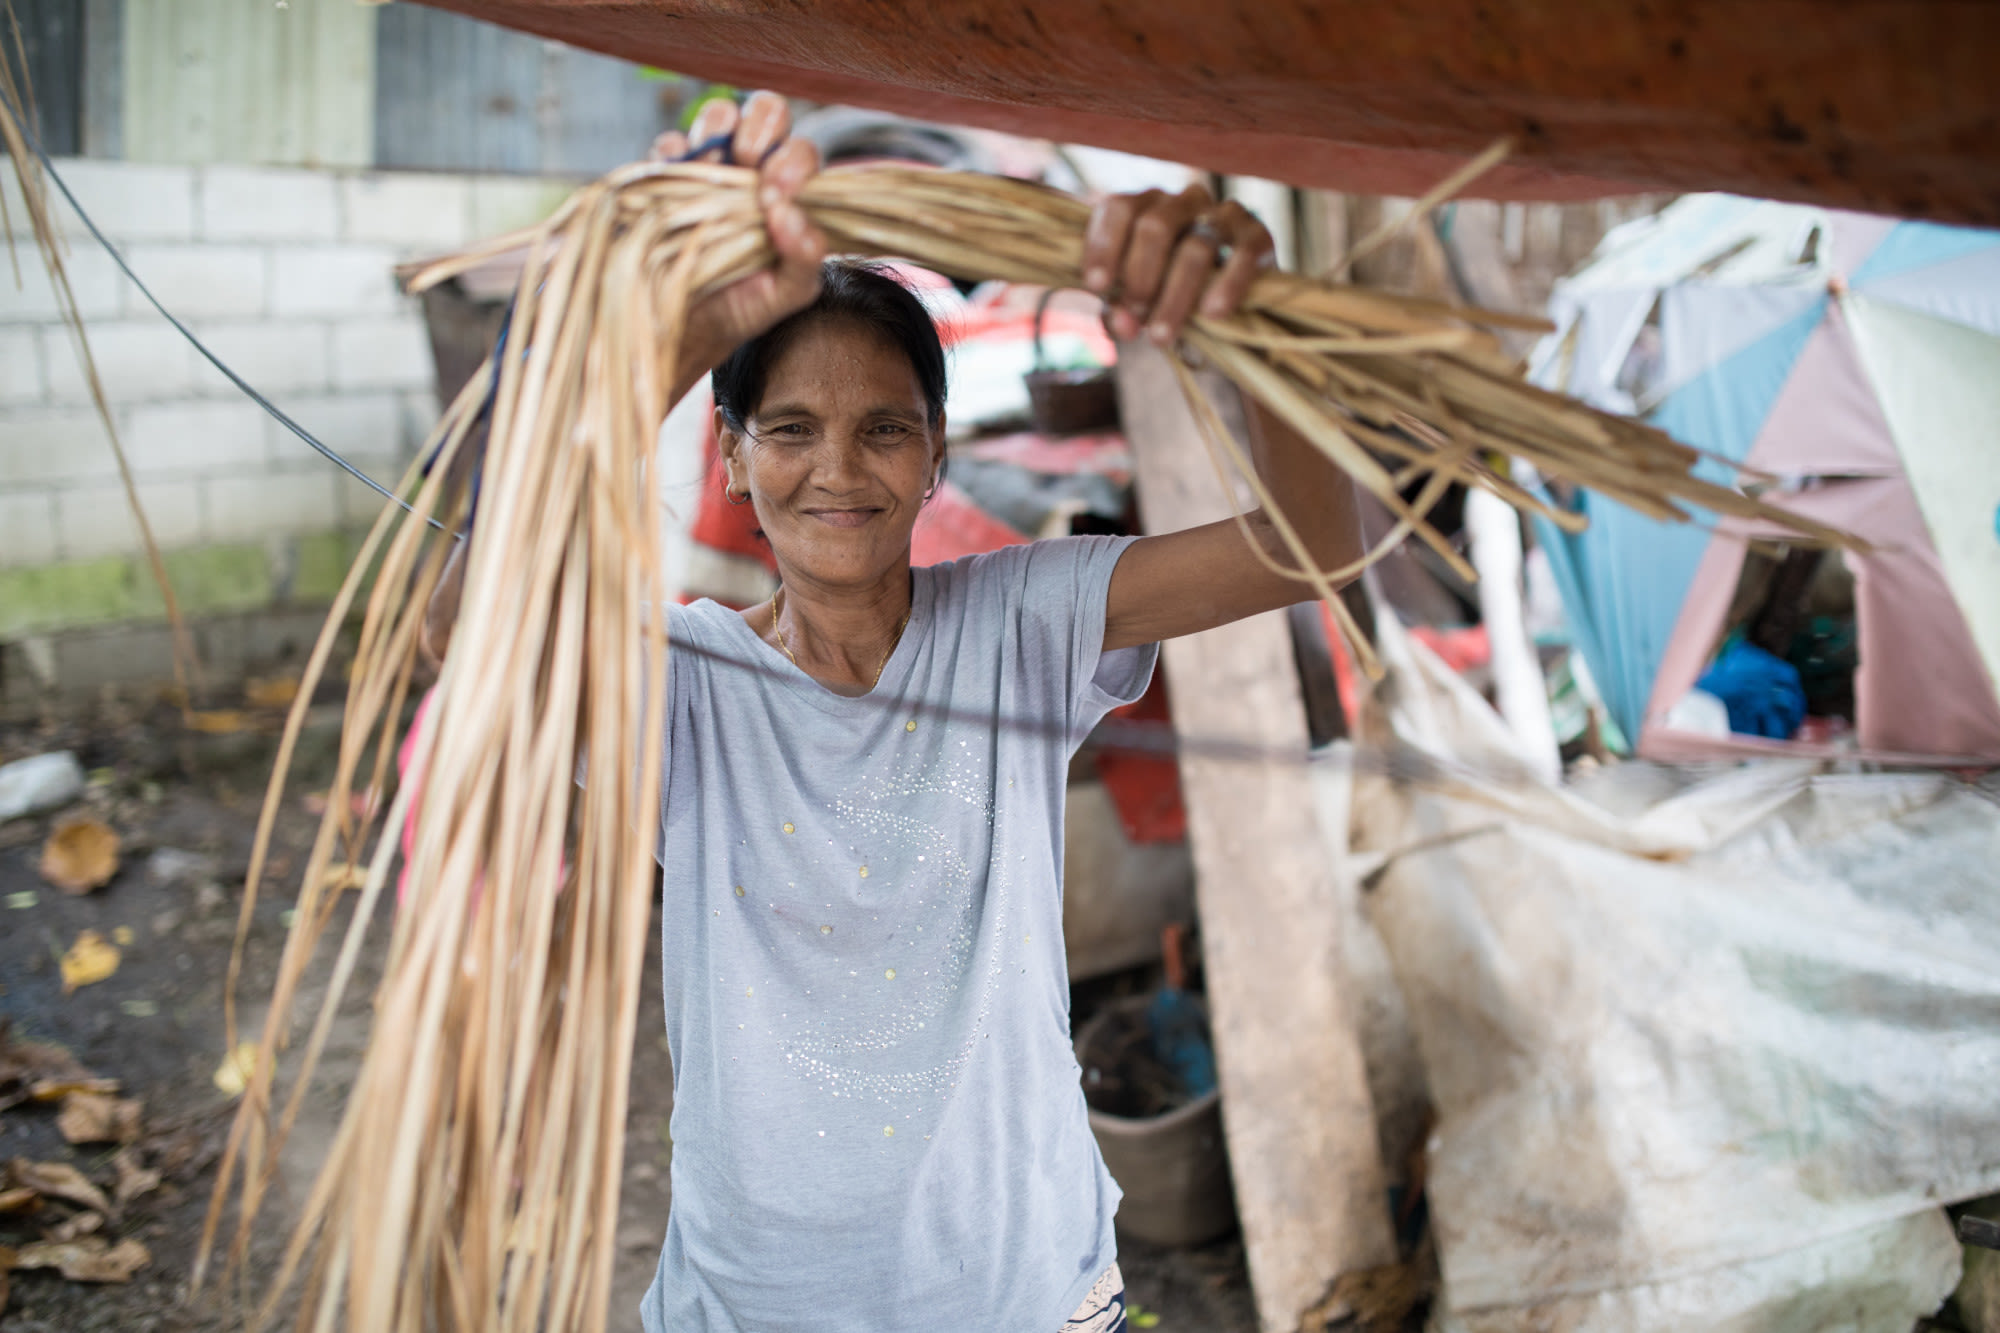 FAUSTA'S LOAN OF $300 THROUGH KIVA ALLOWED HER TO GROW HER BICYCLE BUSINESS AND SUPPORT HER FAMILY.